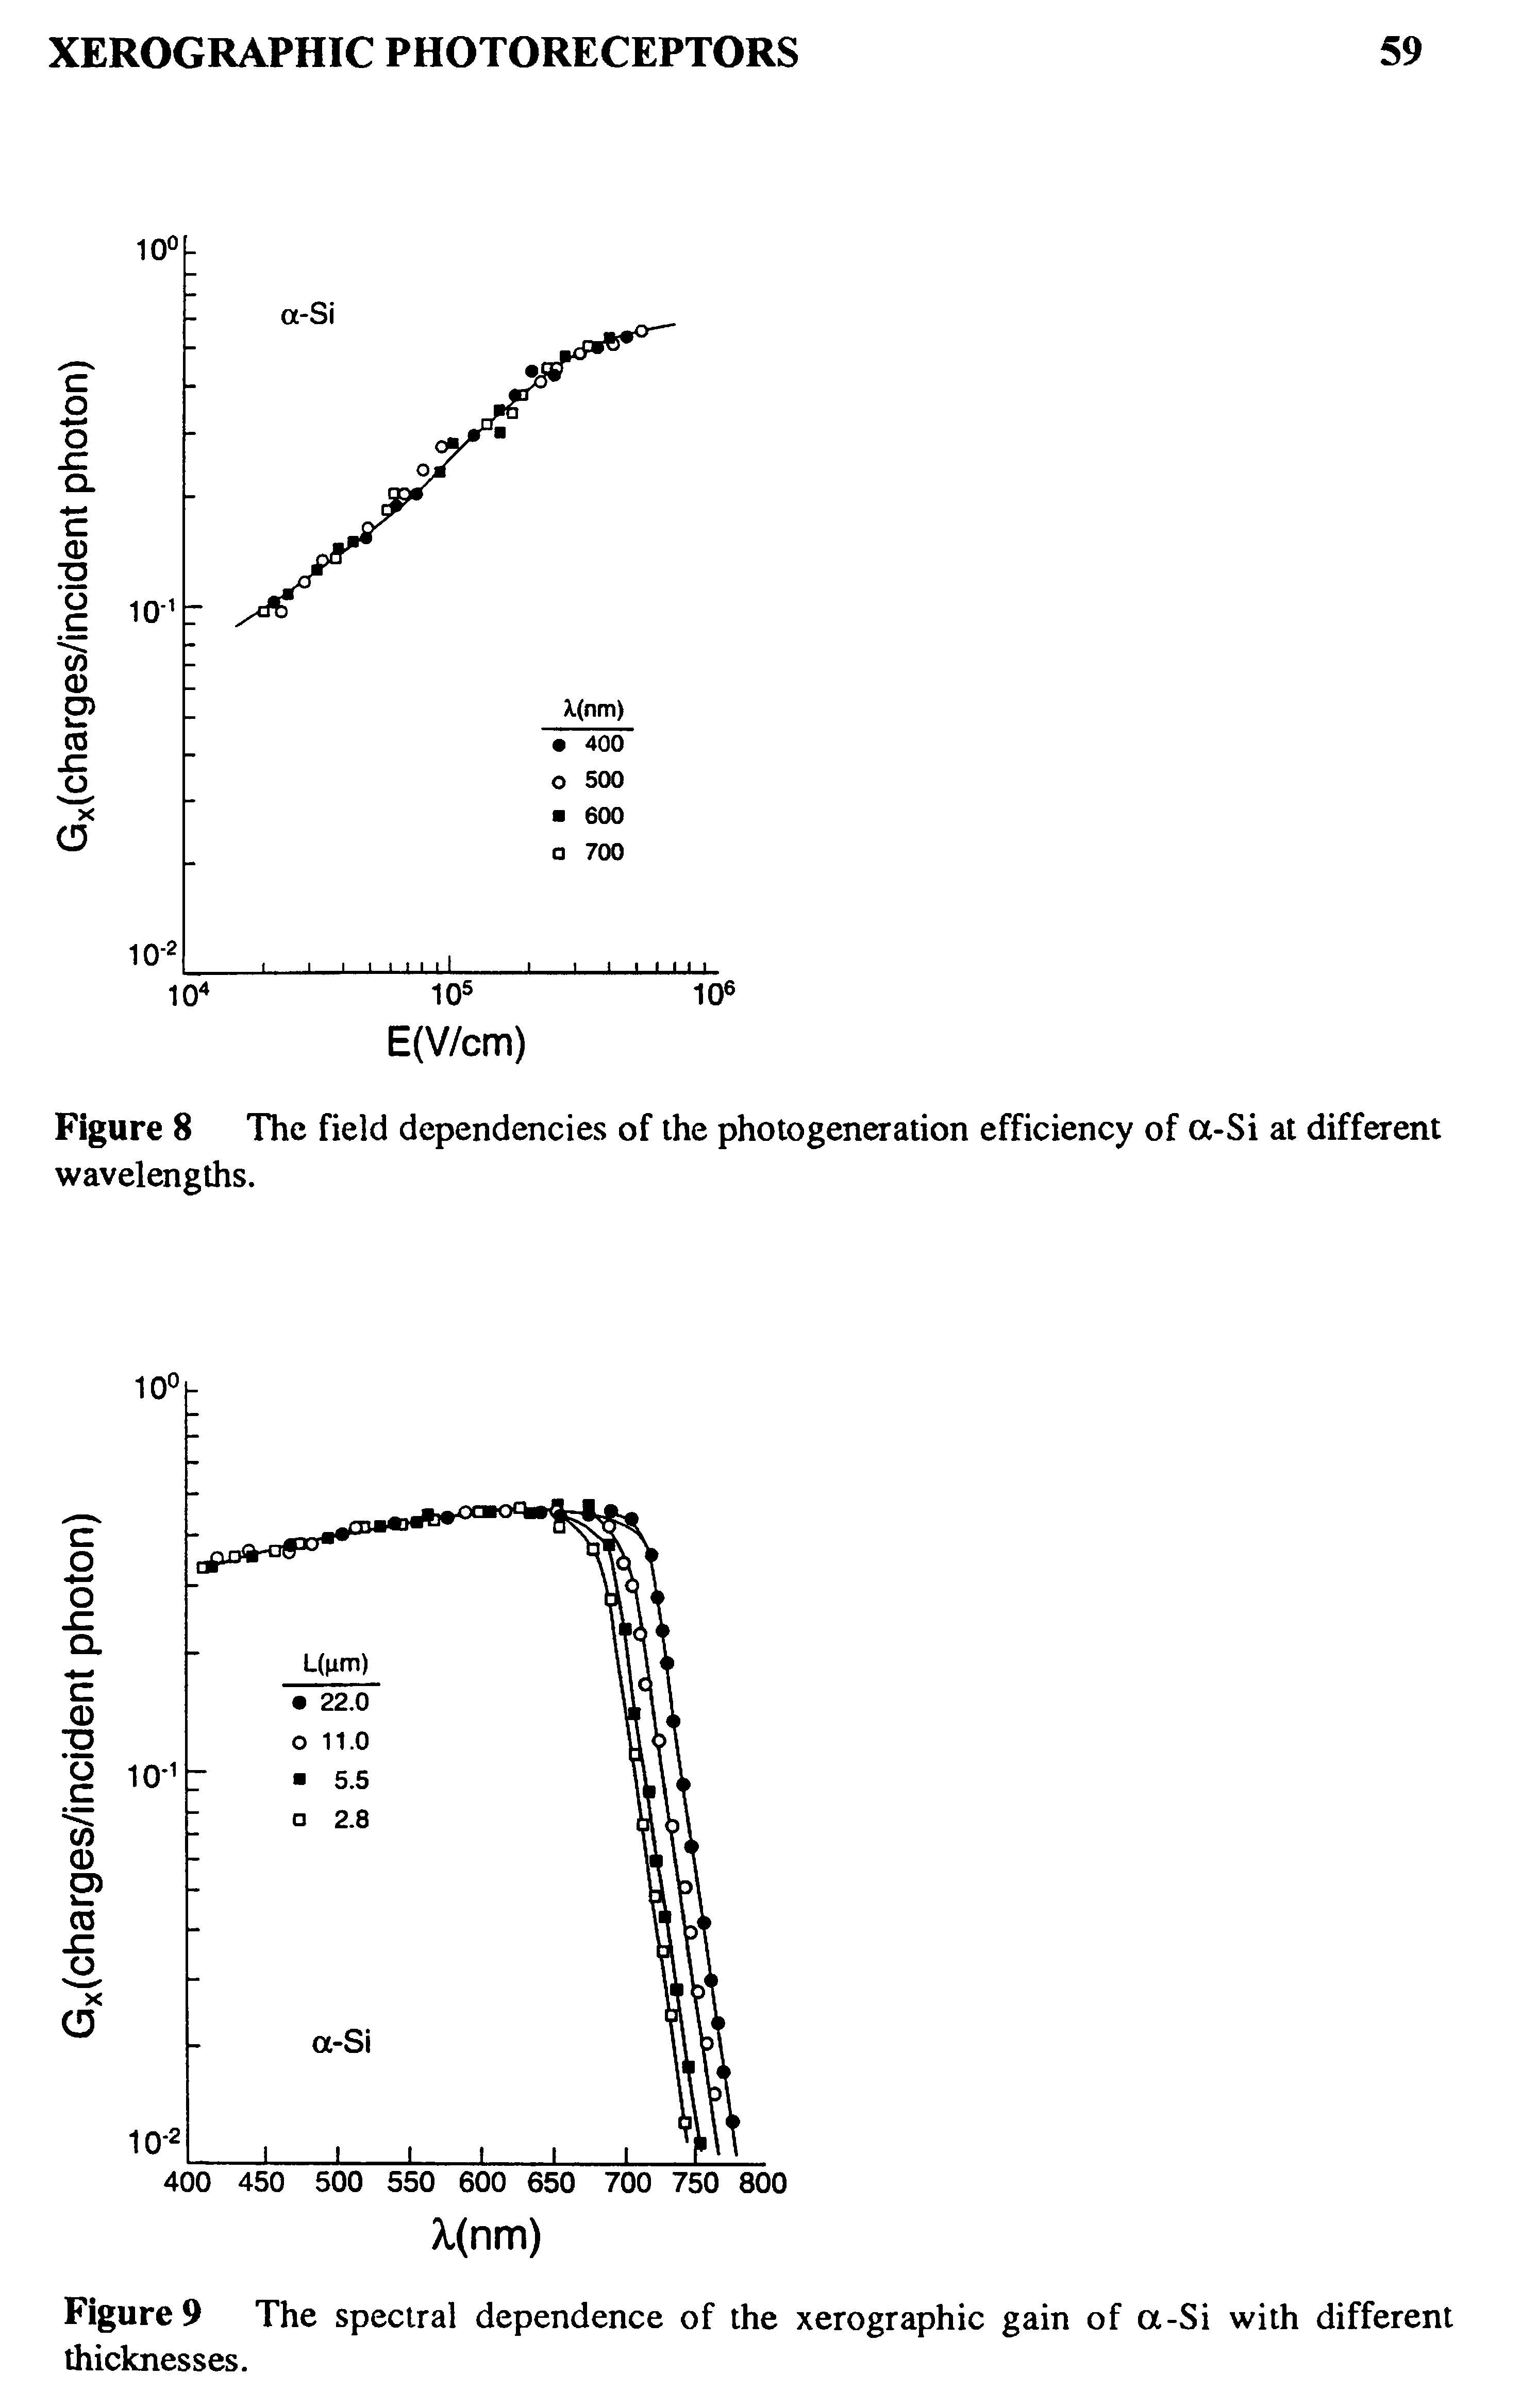 Figure 8 The field dependencies of the photogeneration efficiency of a-Si at different wavelengths.